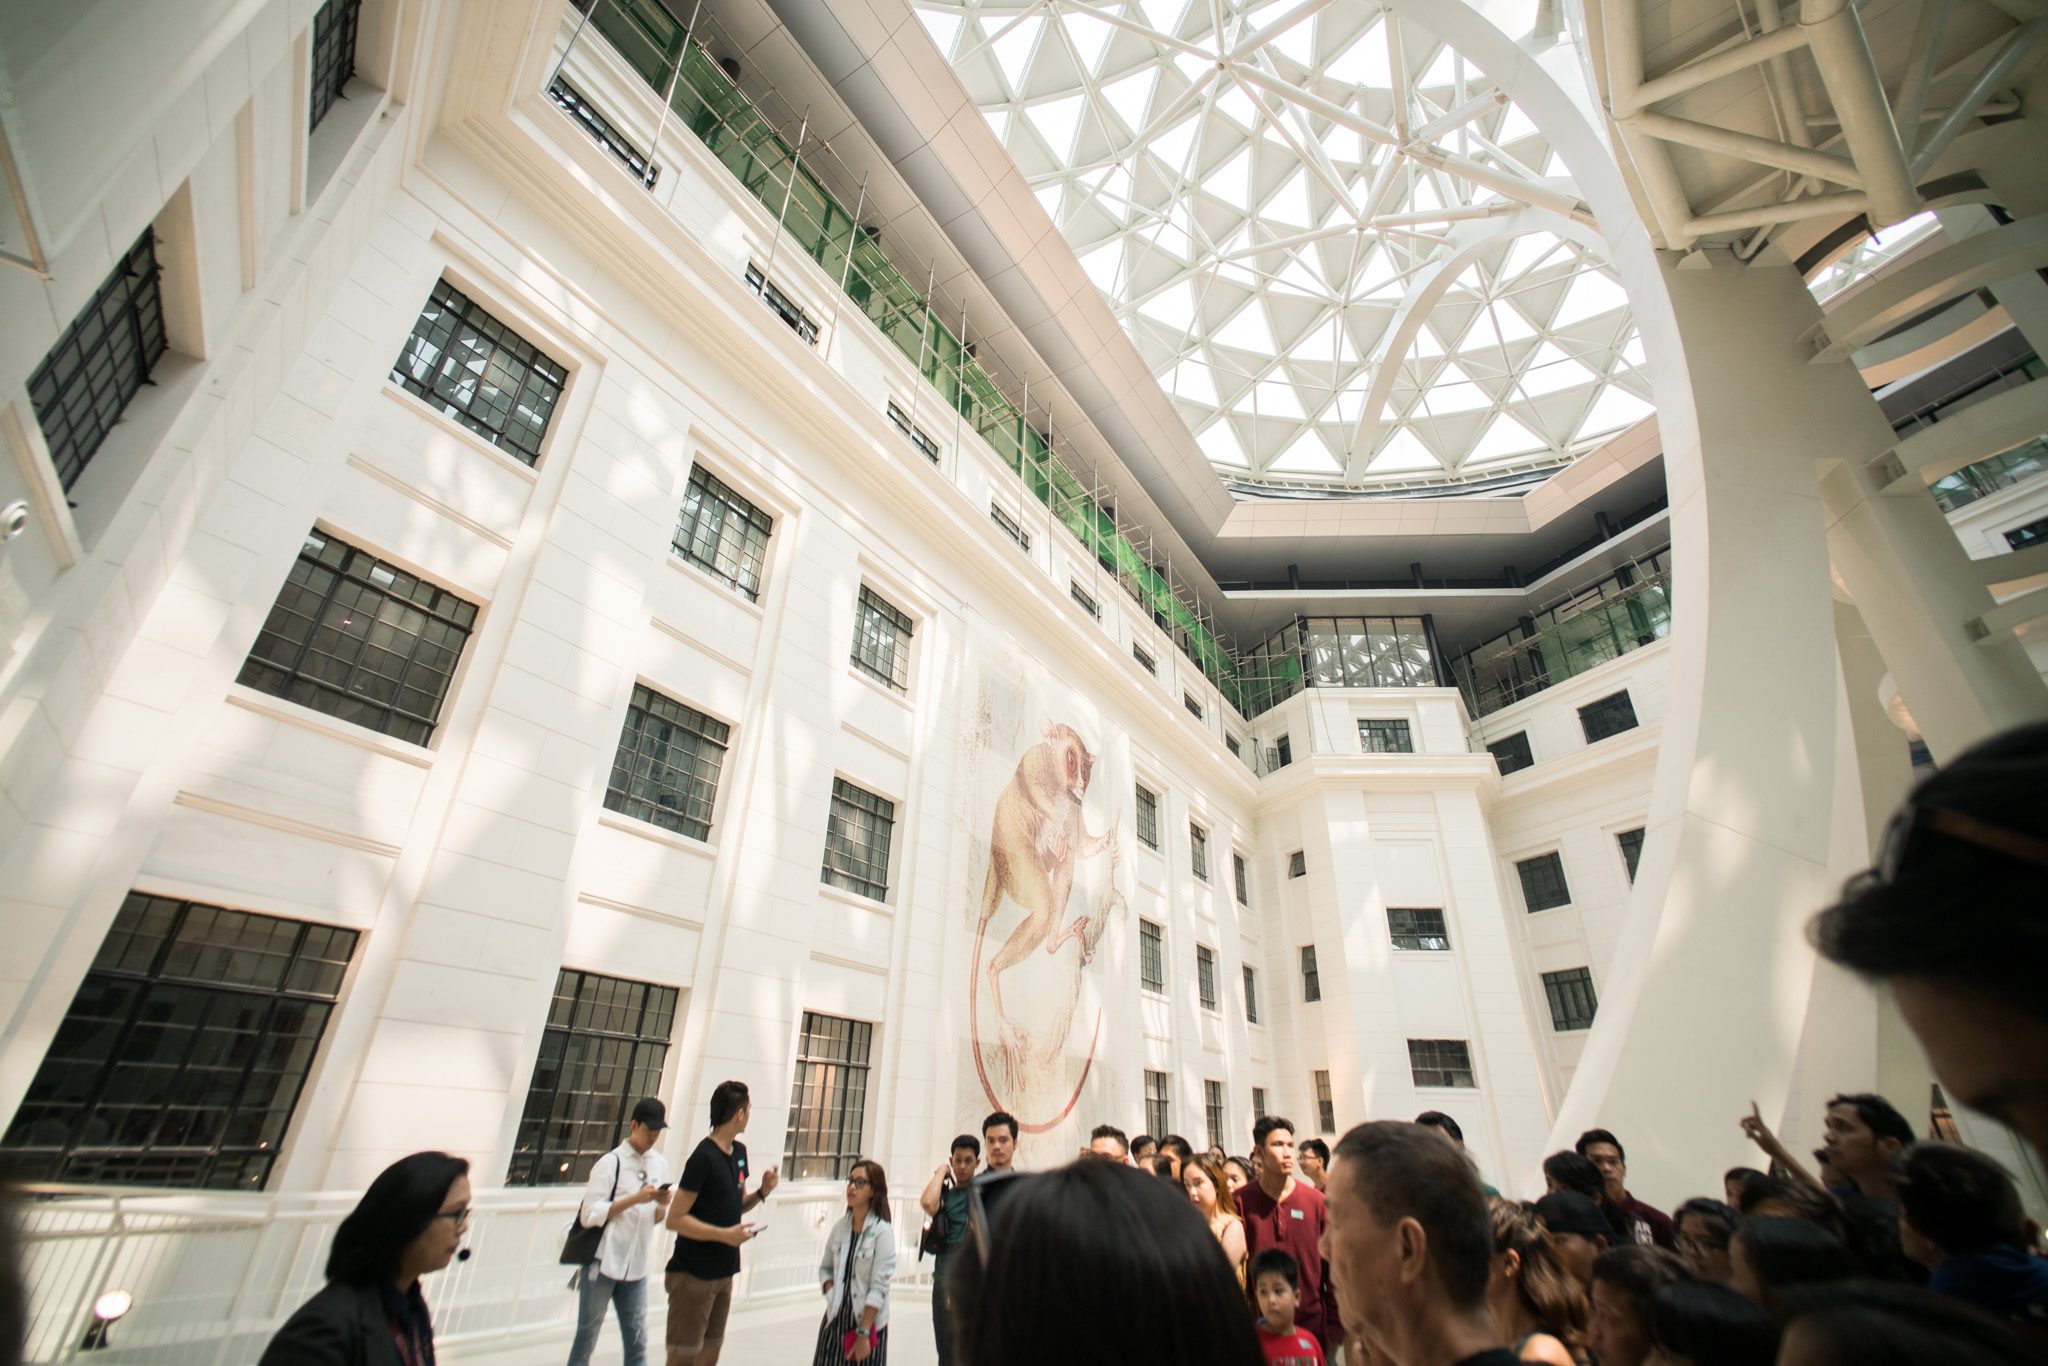 What you can see at the newly-opened National Museum of Natural History